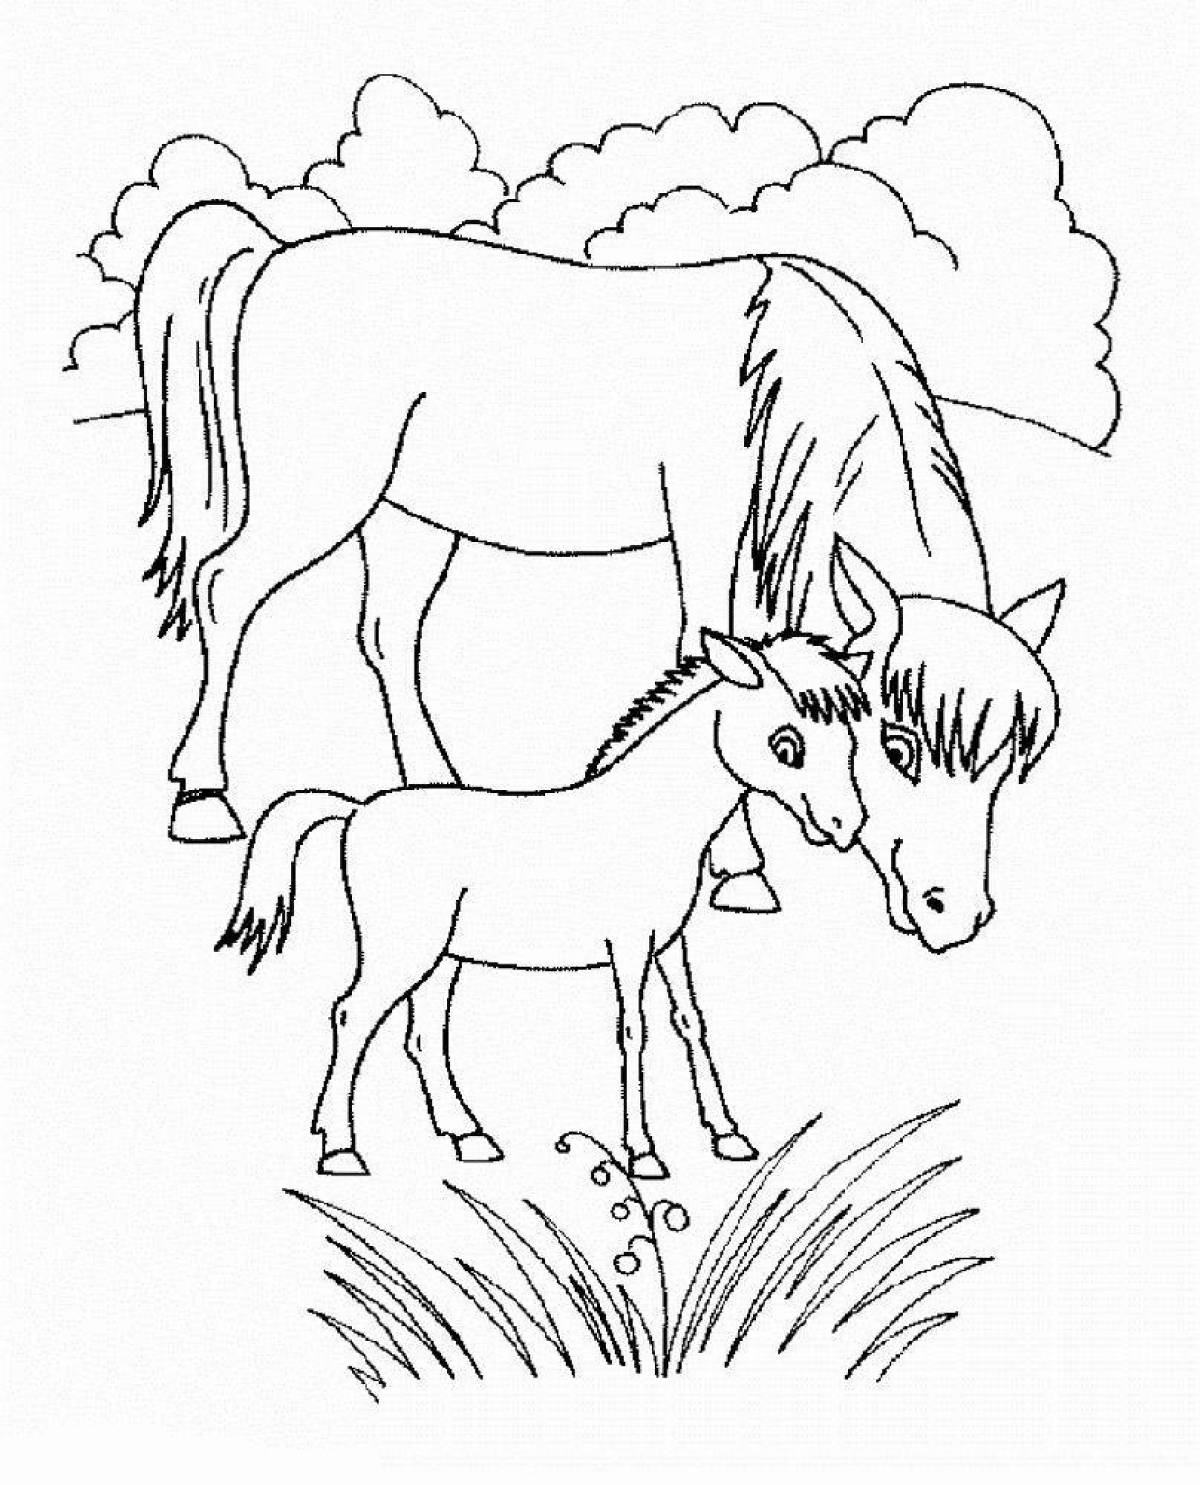 Festive January coloring page